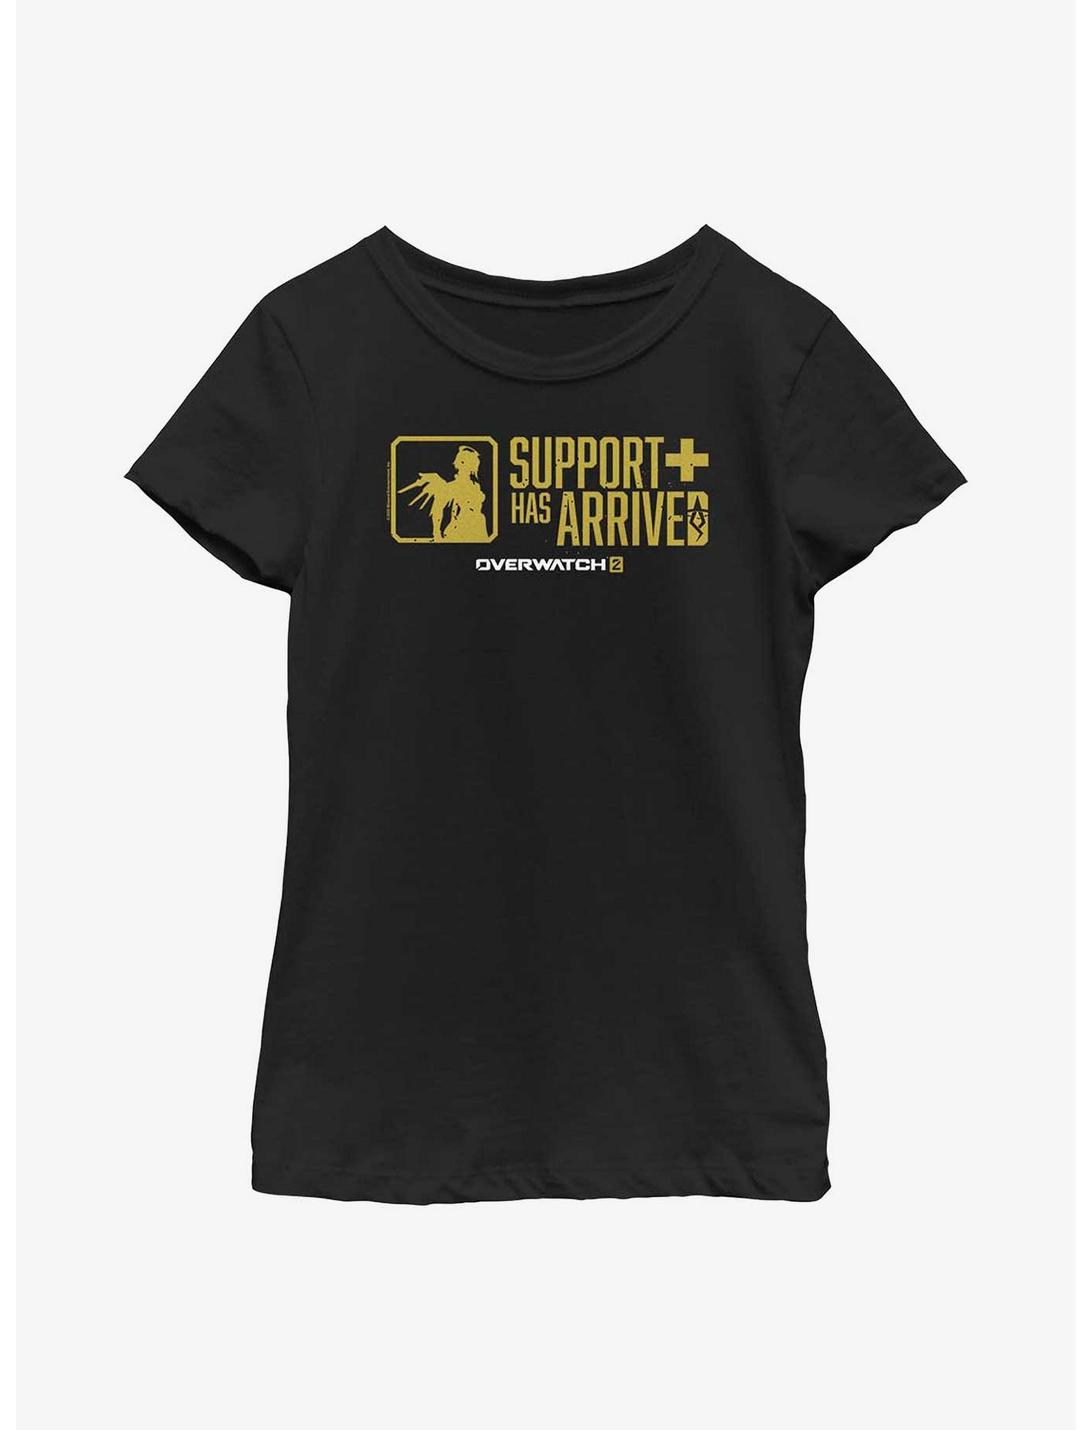 Overwatch 2 Mercy Support Has Arrived Youth Girls T-Shirt, BLACK, hi-res